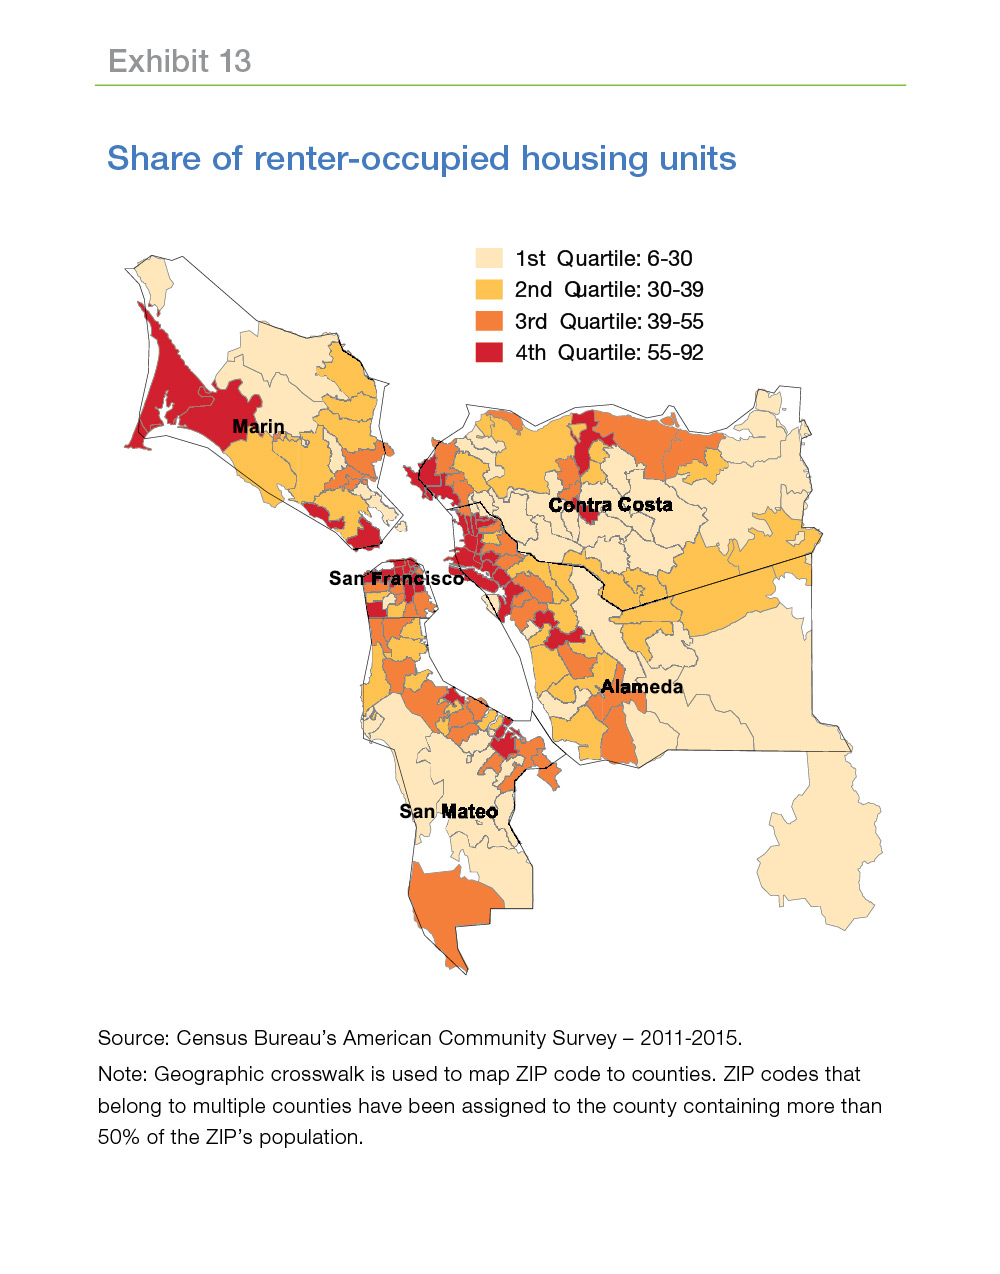 Maps showing share of renter-occupied housing units